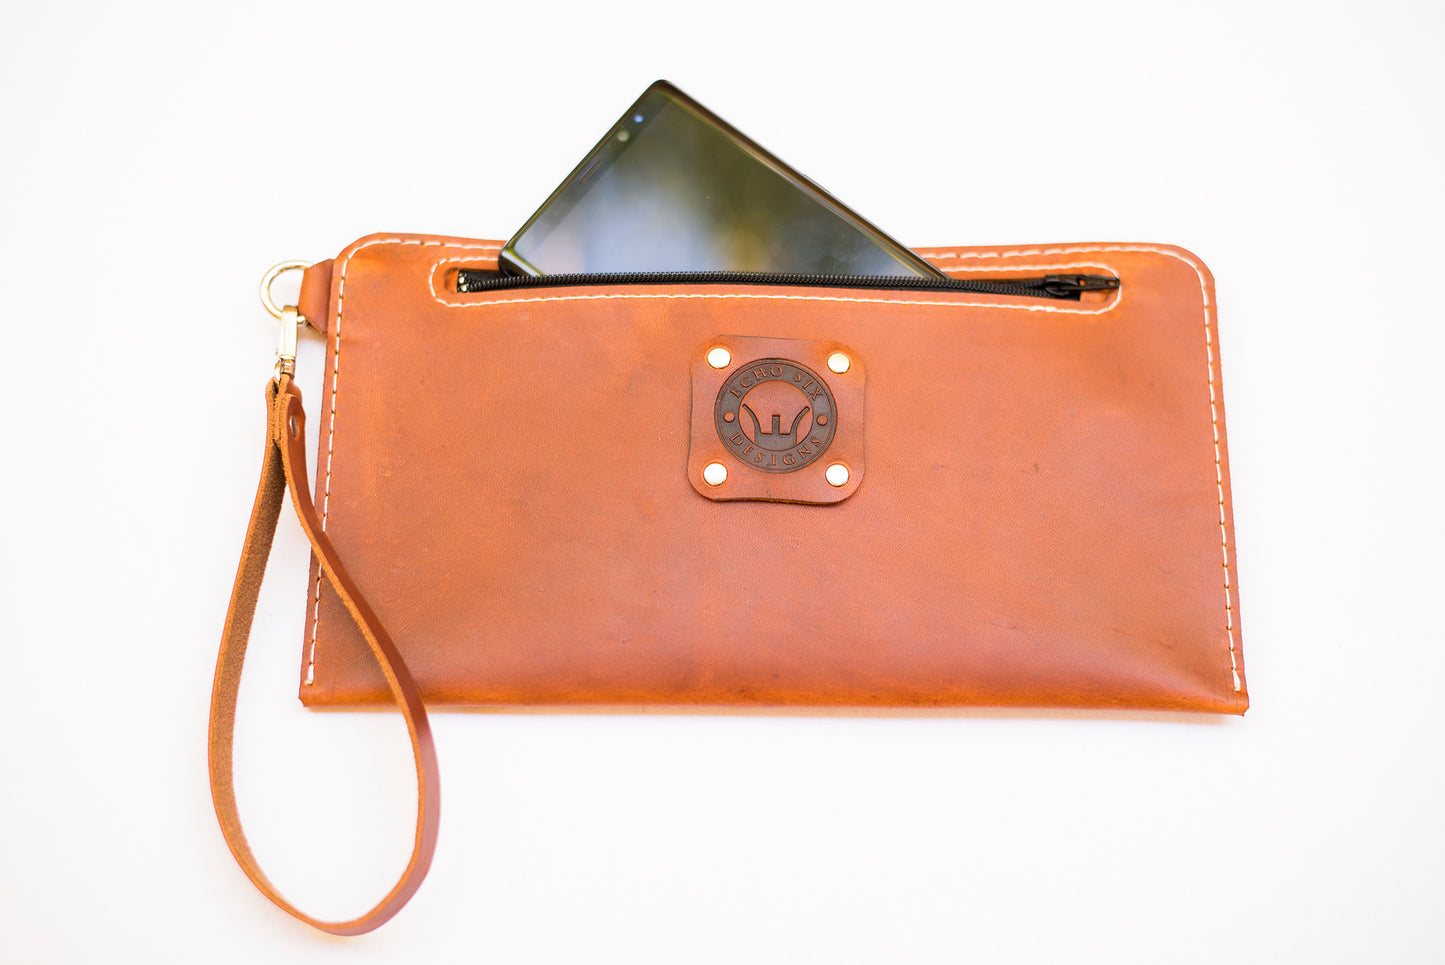 New Haven Leather Clutch | Limited